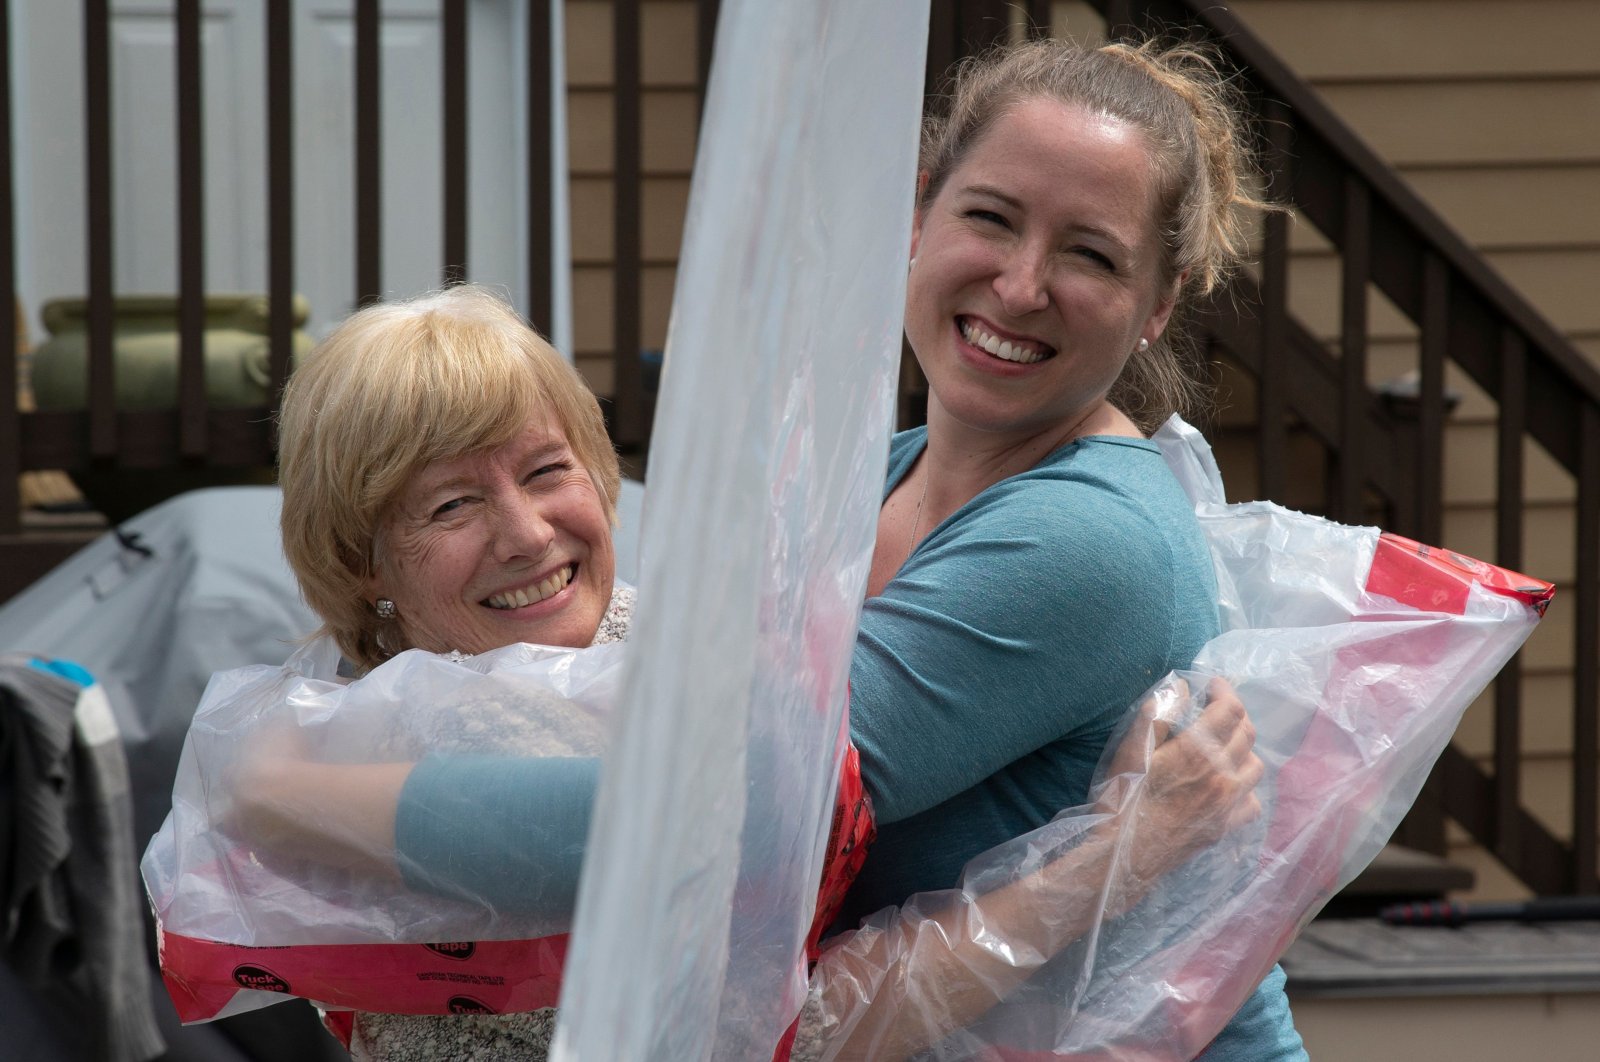 Carolyn Ellis (R) hugs her mother Susan Watts using the "Hug Glove" that they created as a Mother's Day gift in Guelph, Ontario, Canada, May 16, 2020. (AFP Photo)